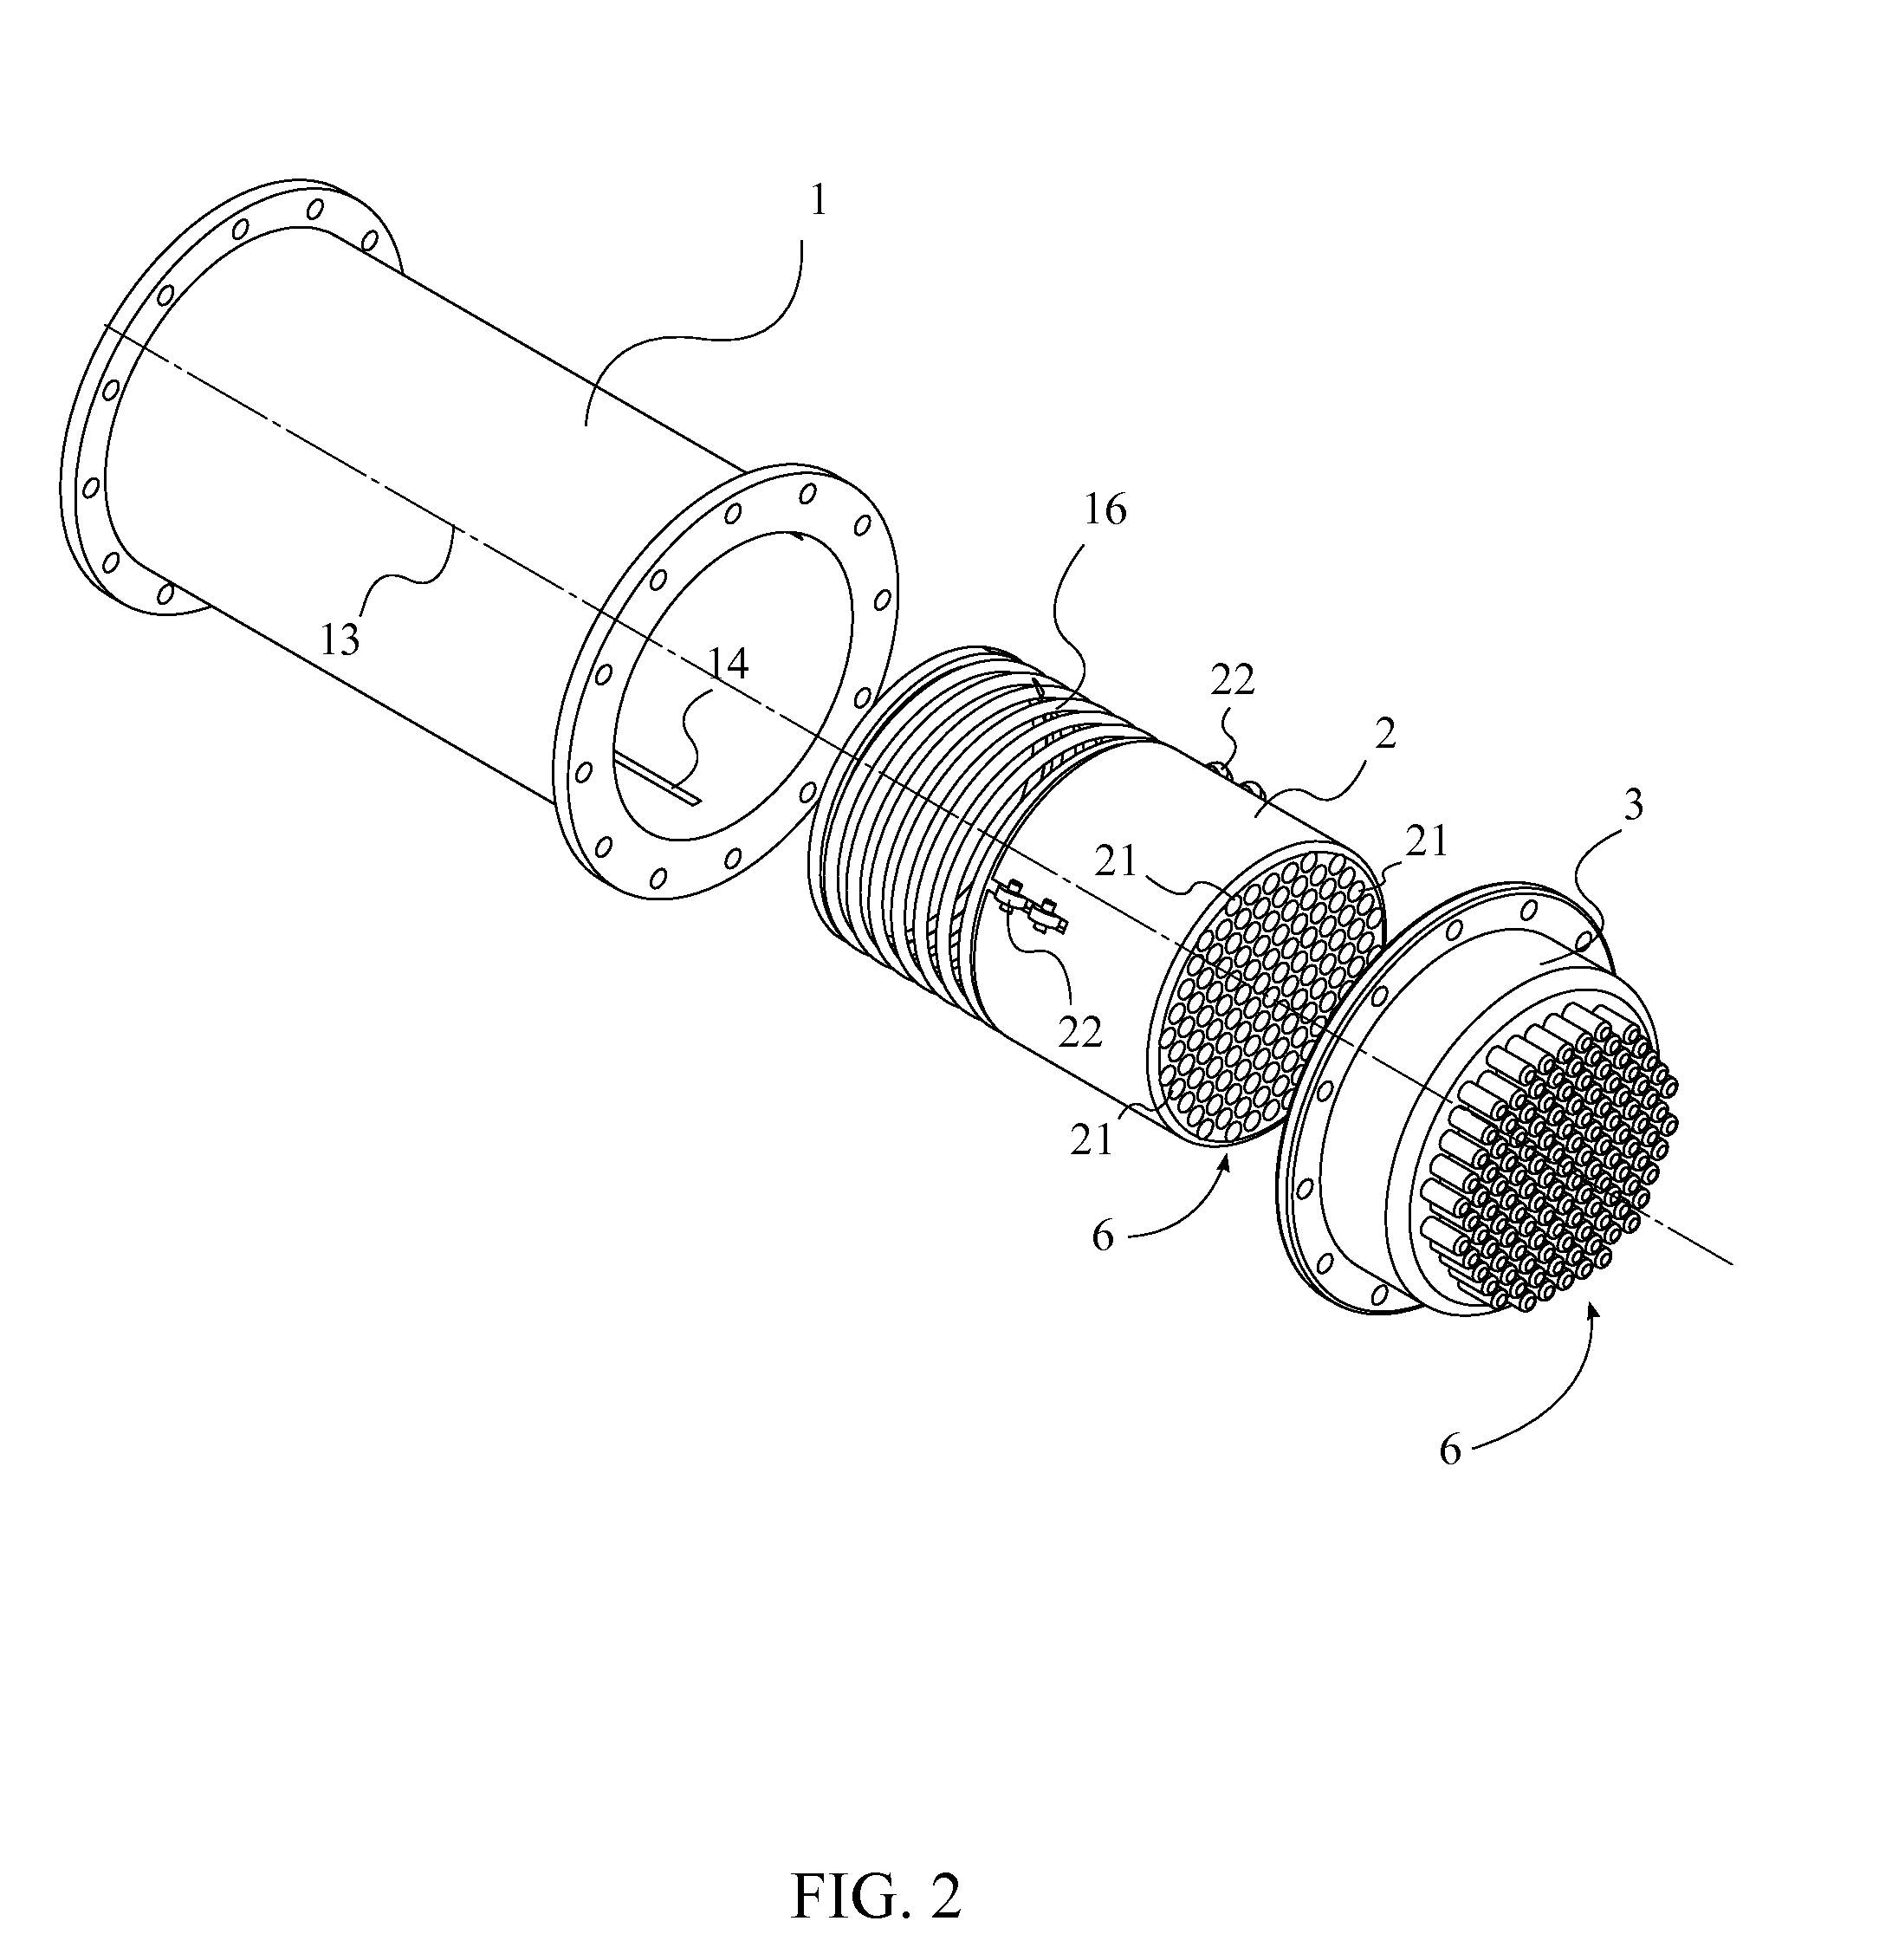 Stirling Engine with Regenerator Internal to the Displacer Piston and Integral Geometry for Heat Transfer and Fluid Flow